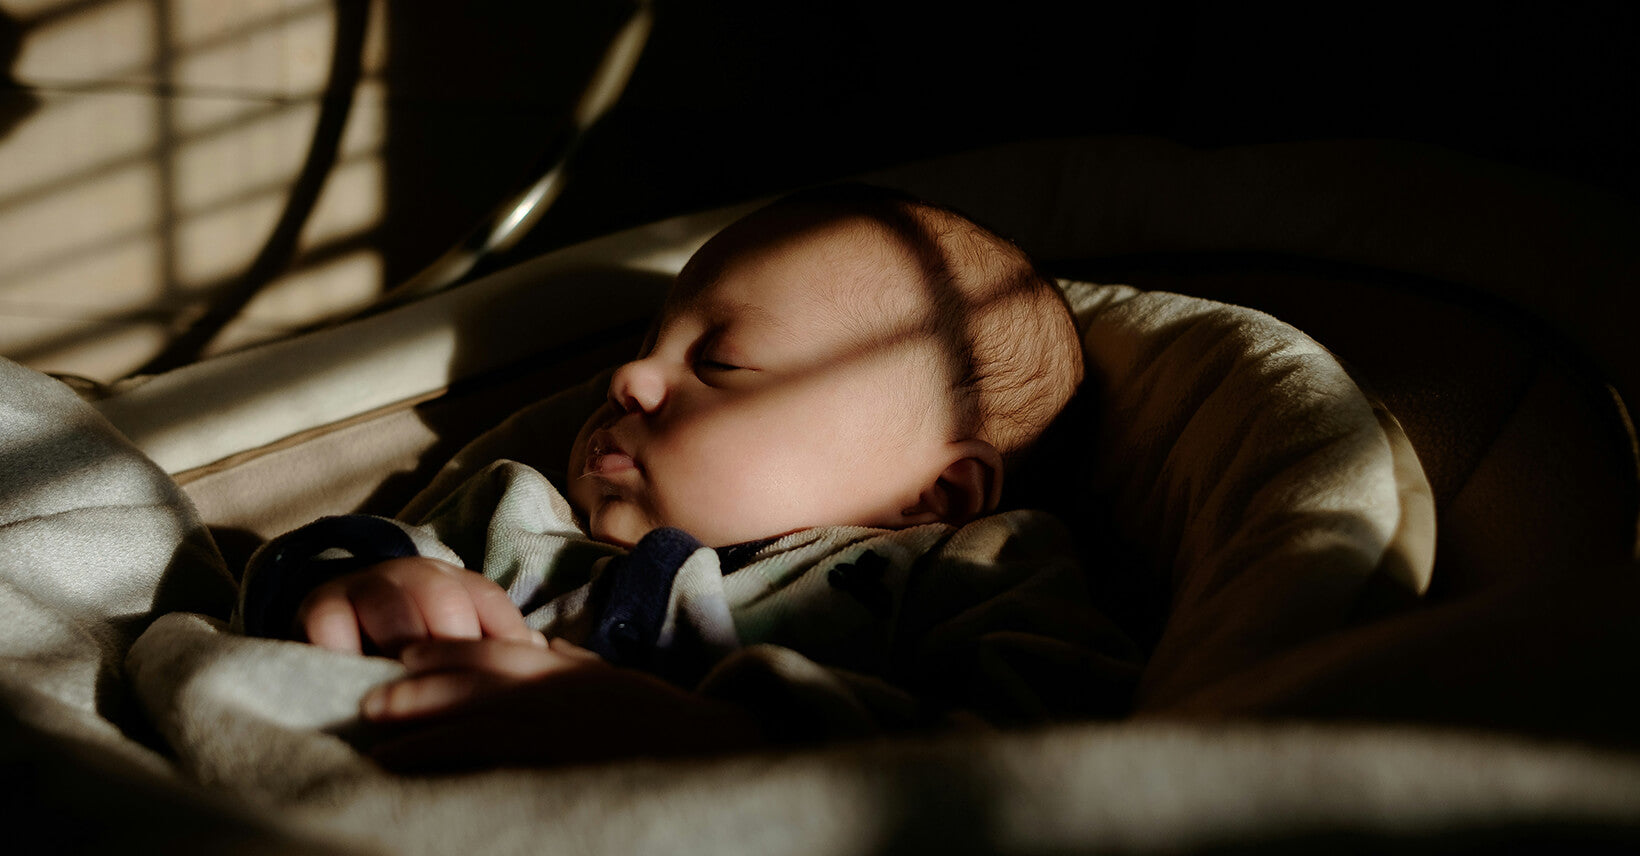 Which Sleep Position Is Safe For Babies?